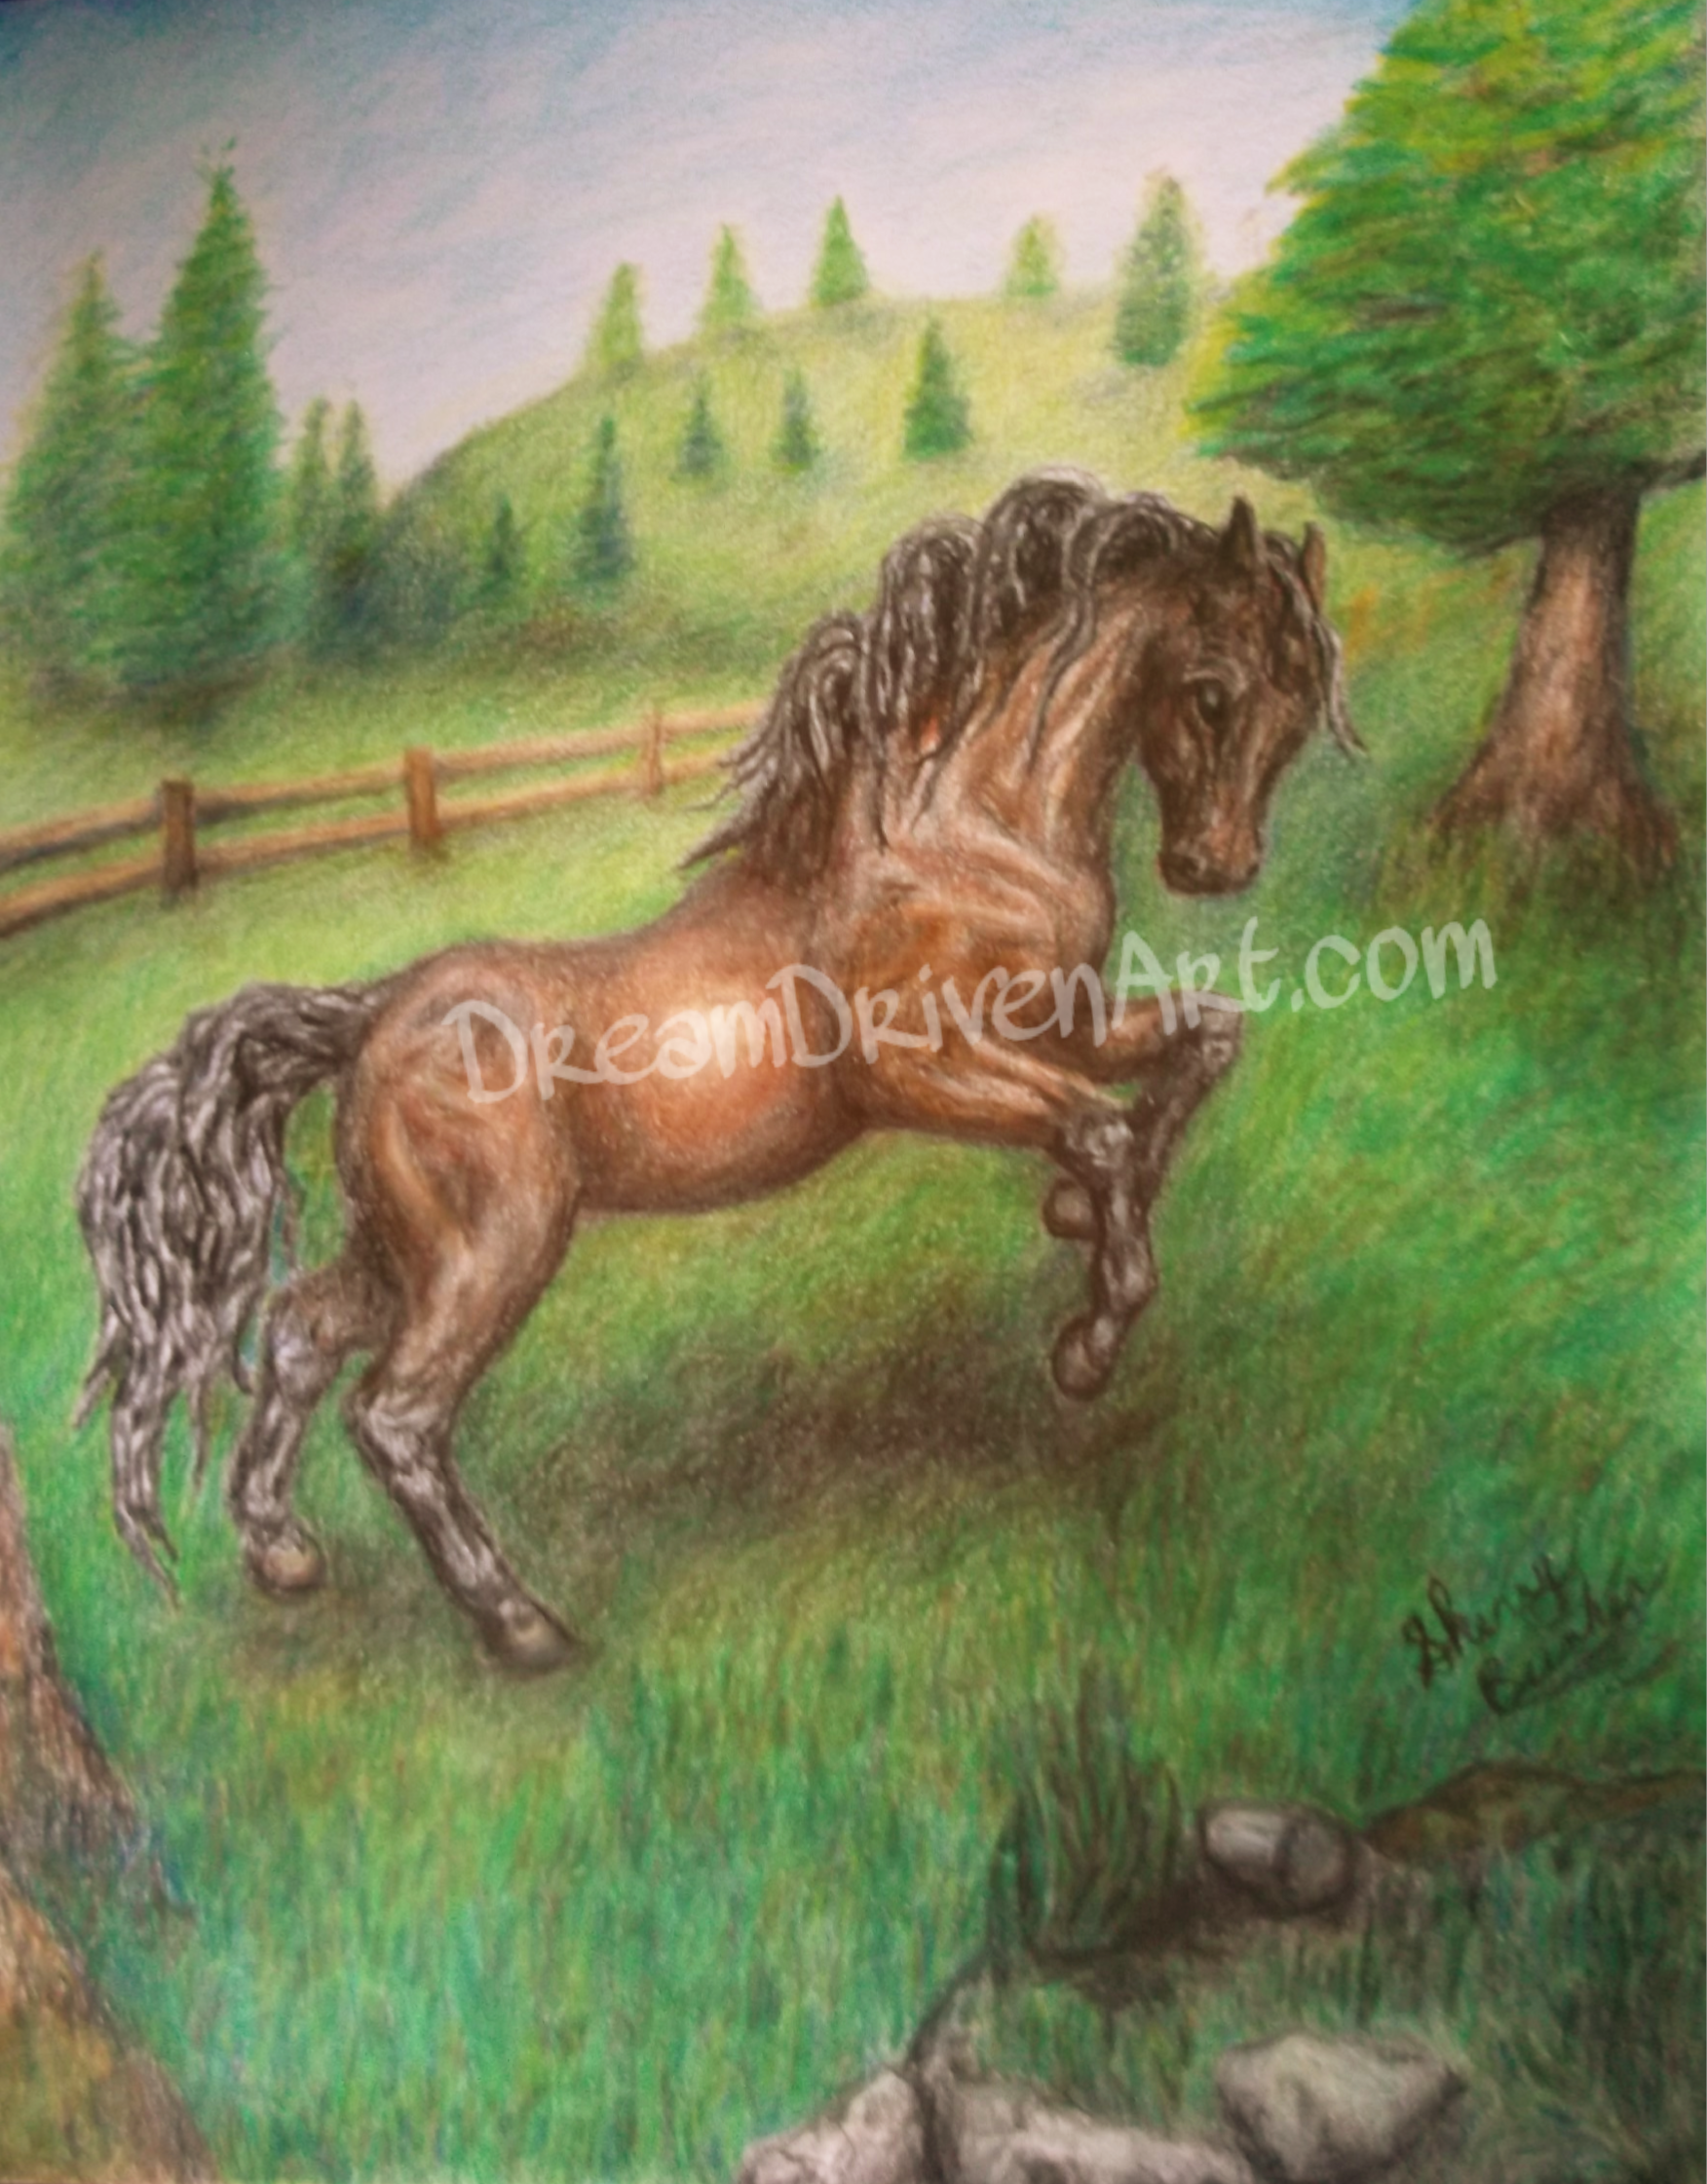 rearing bay colored horse in colored pencil